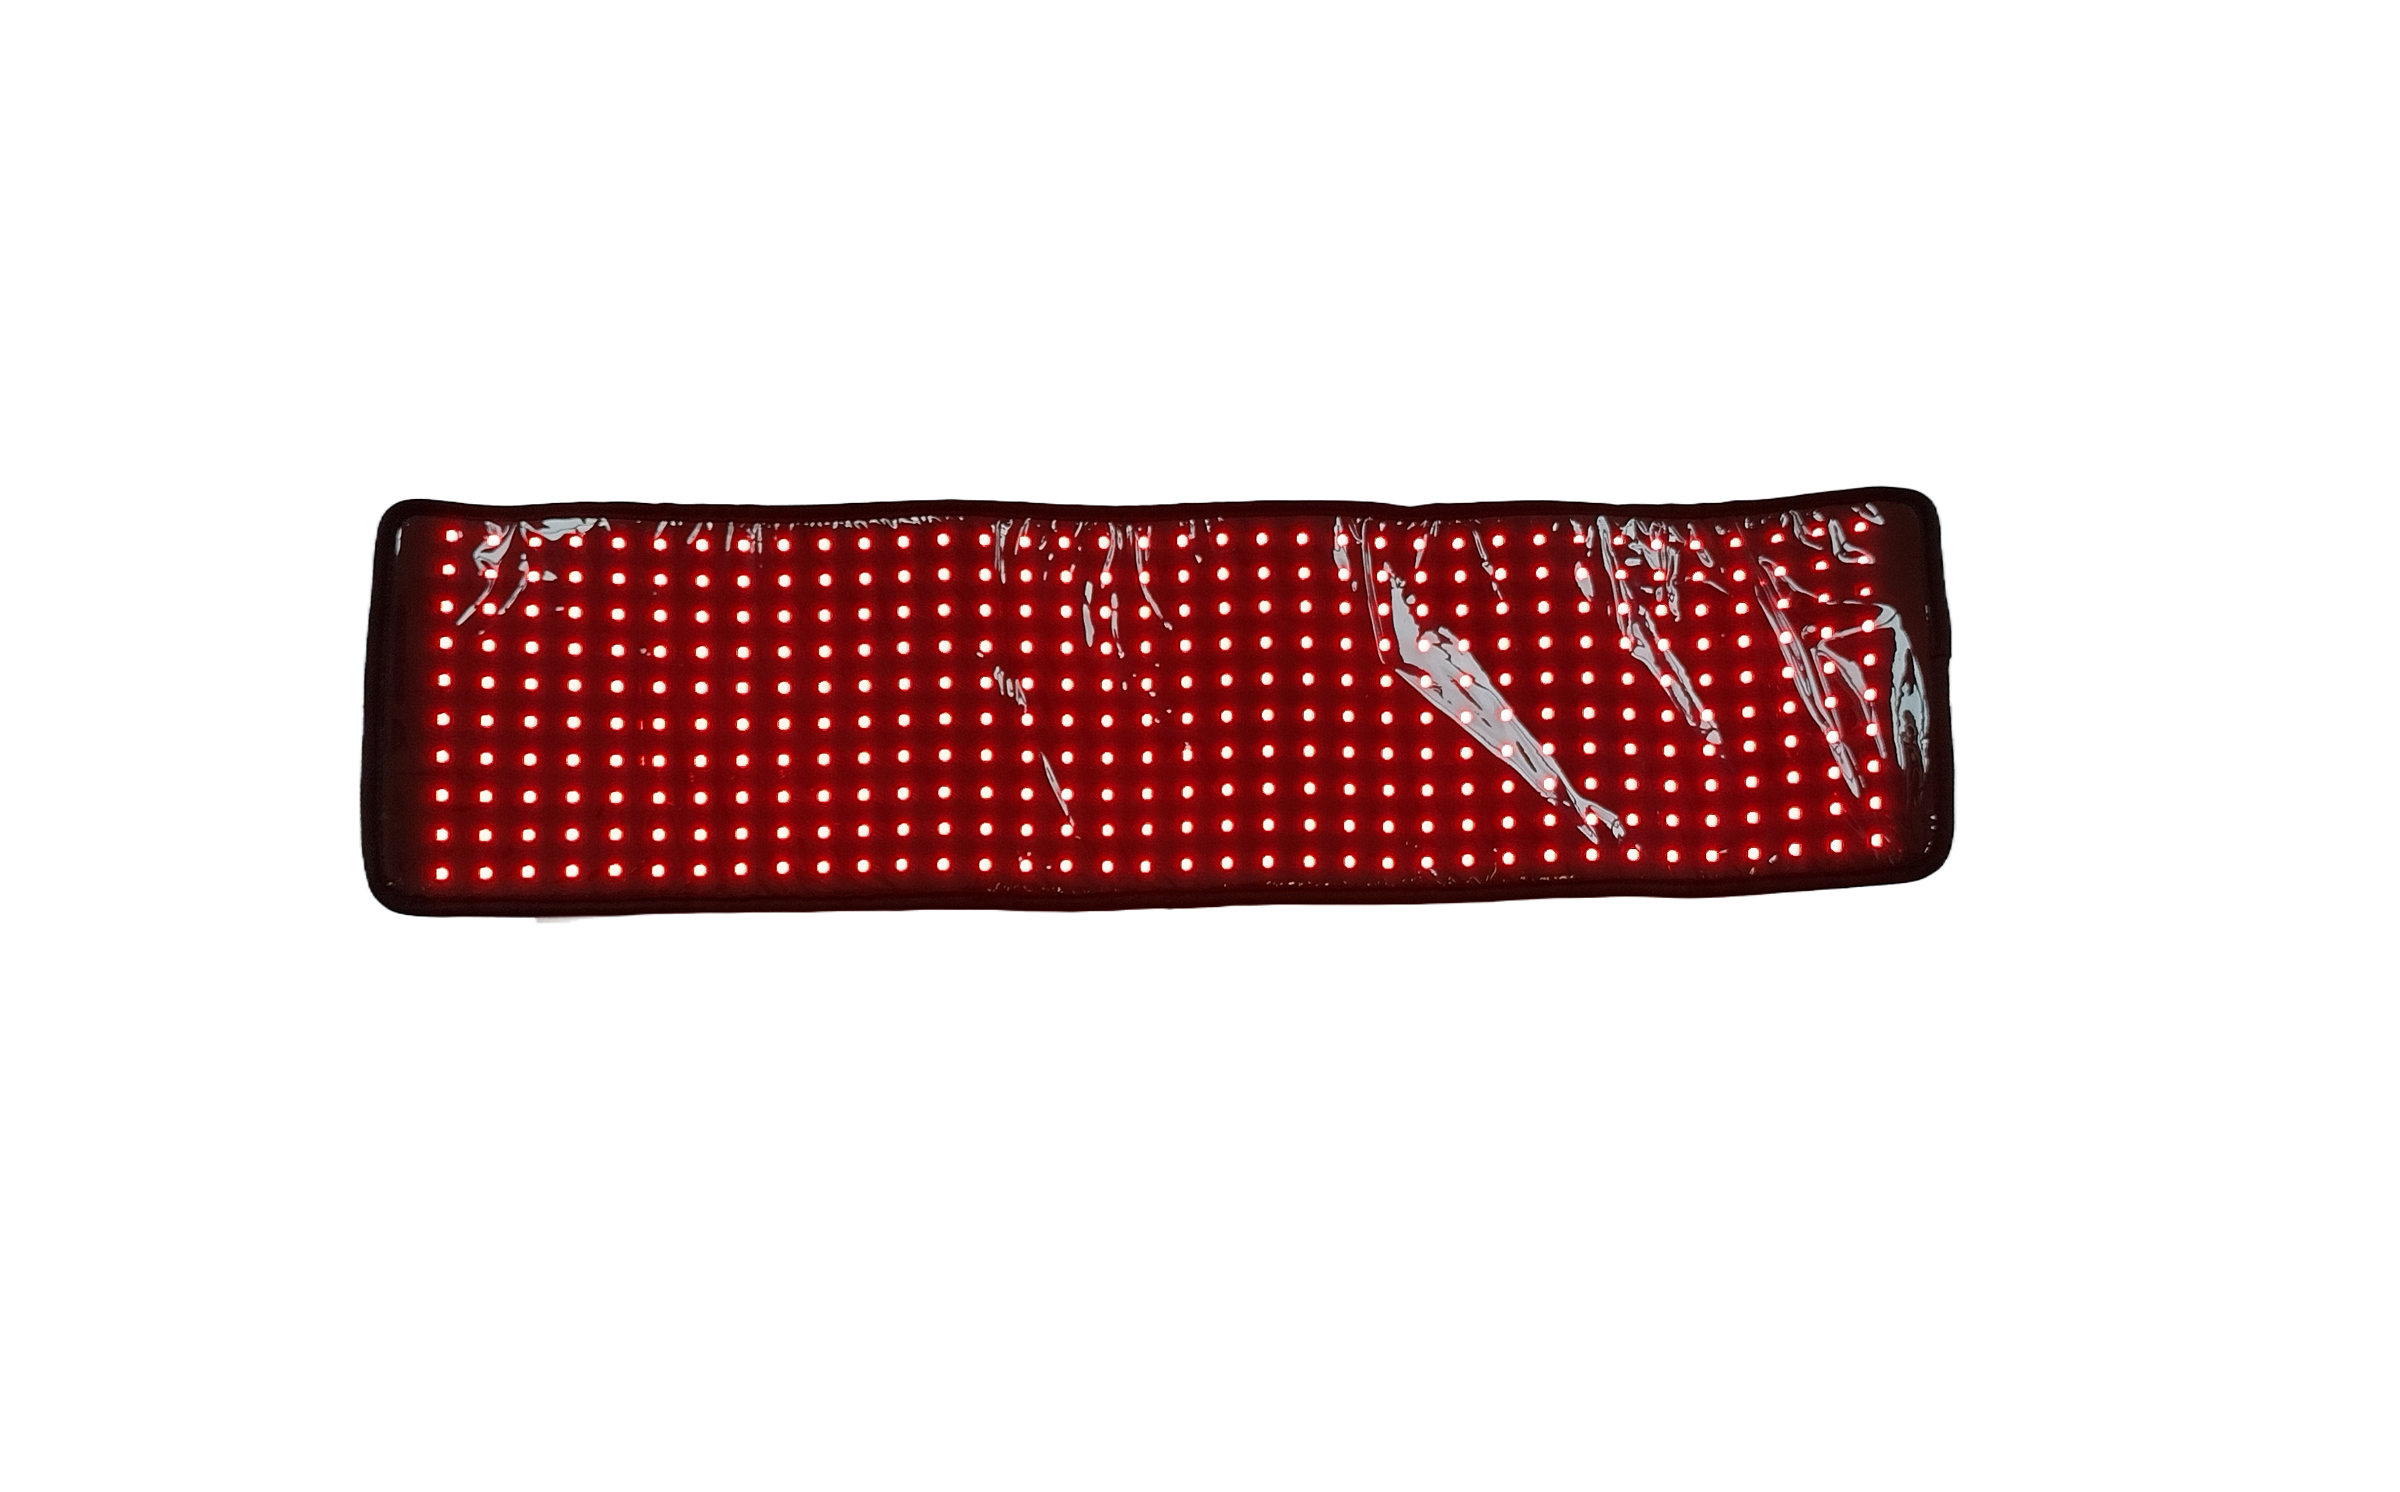 Light therapy flex pad for wound healing, reduction of pain and inflammation